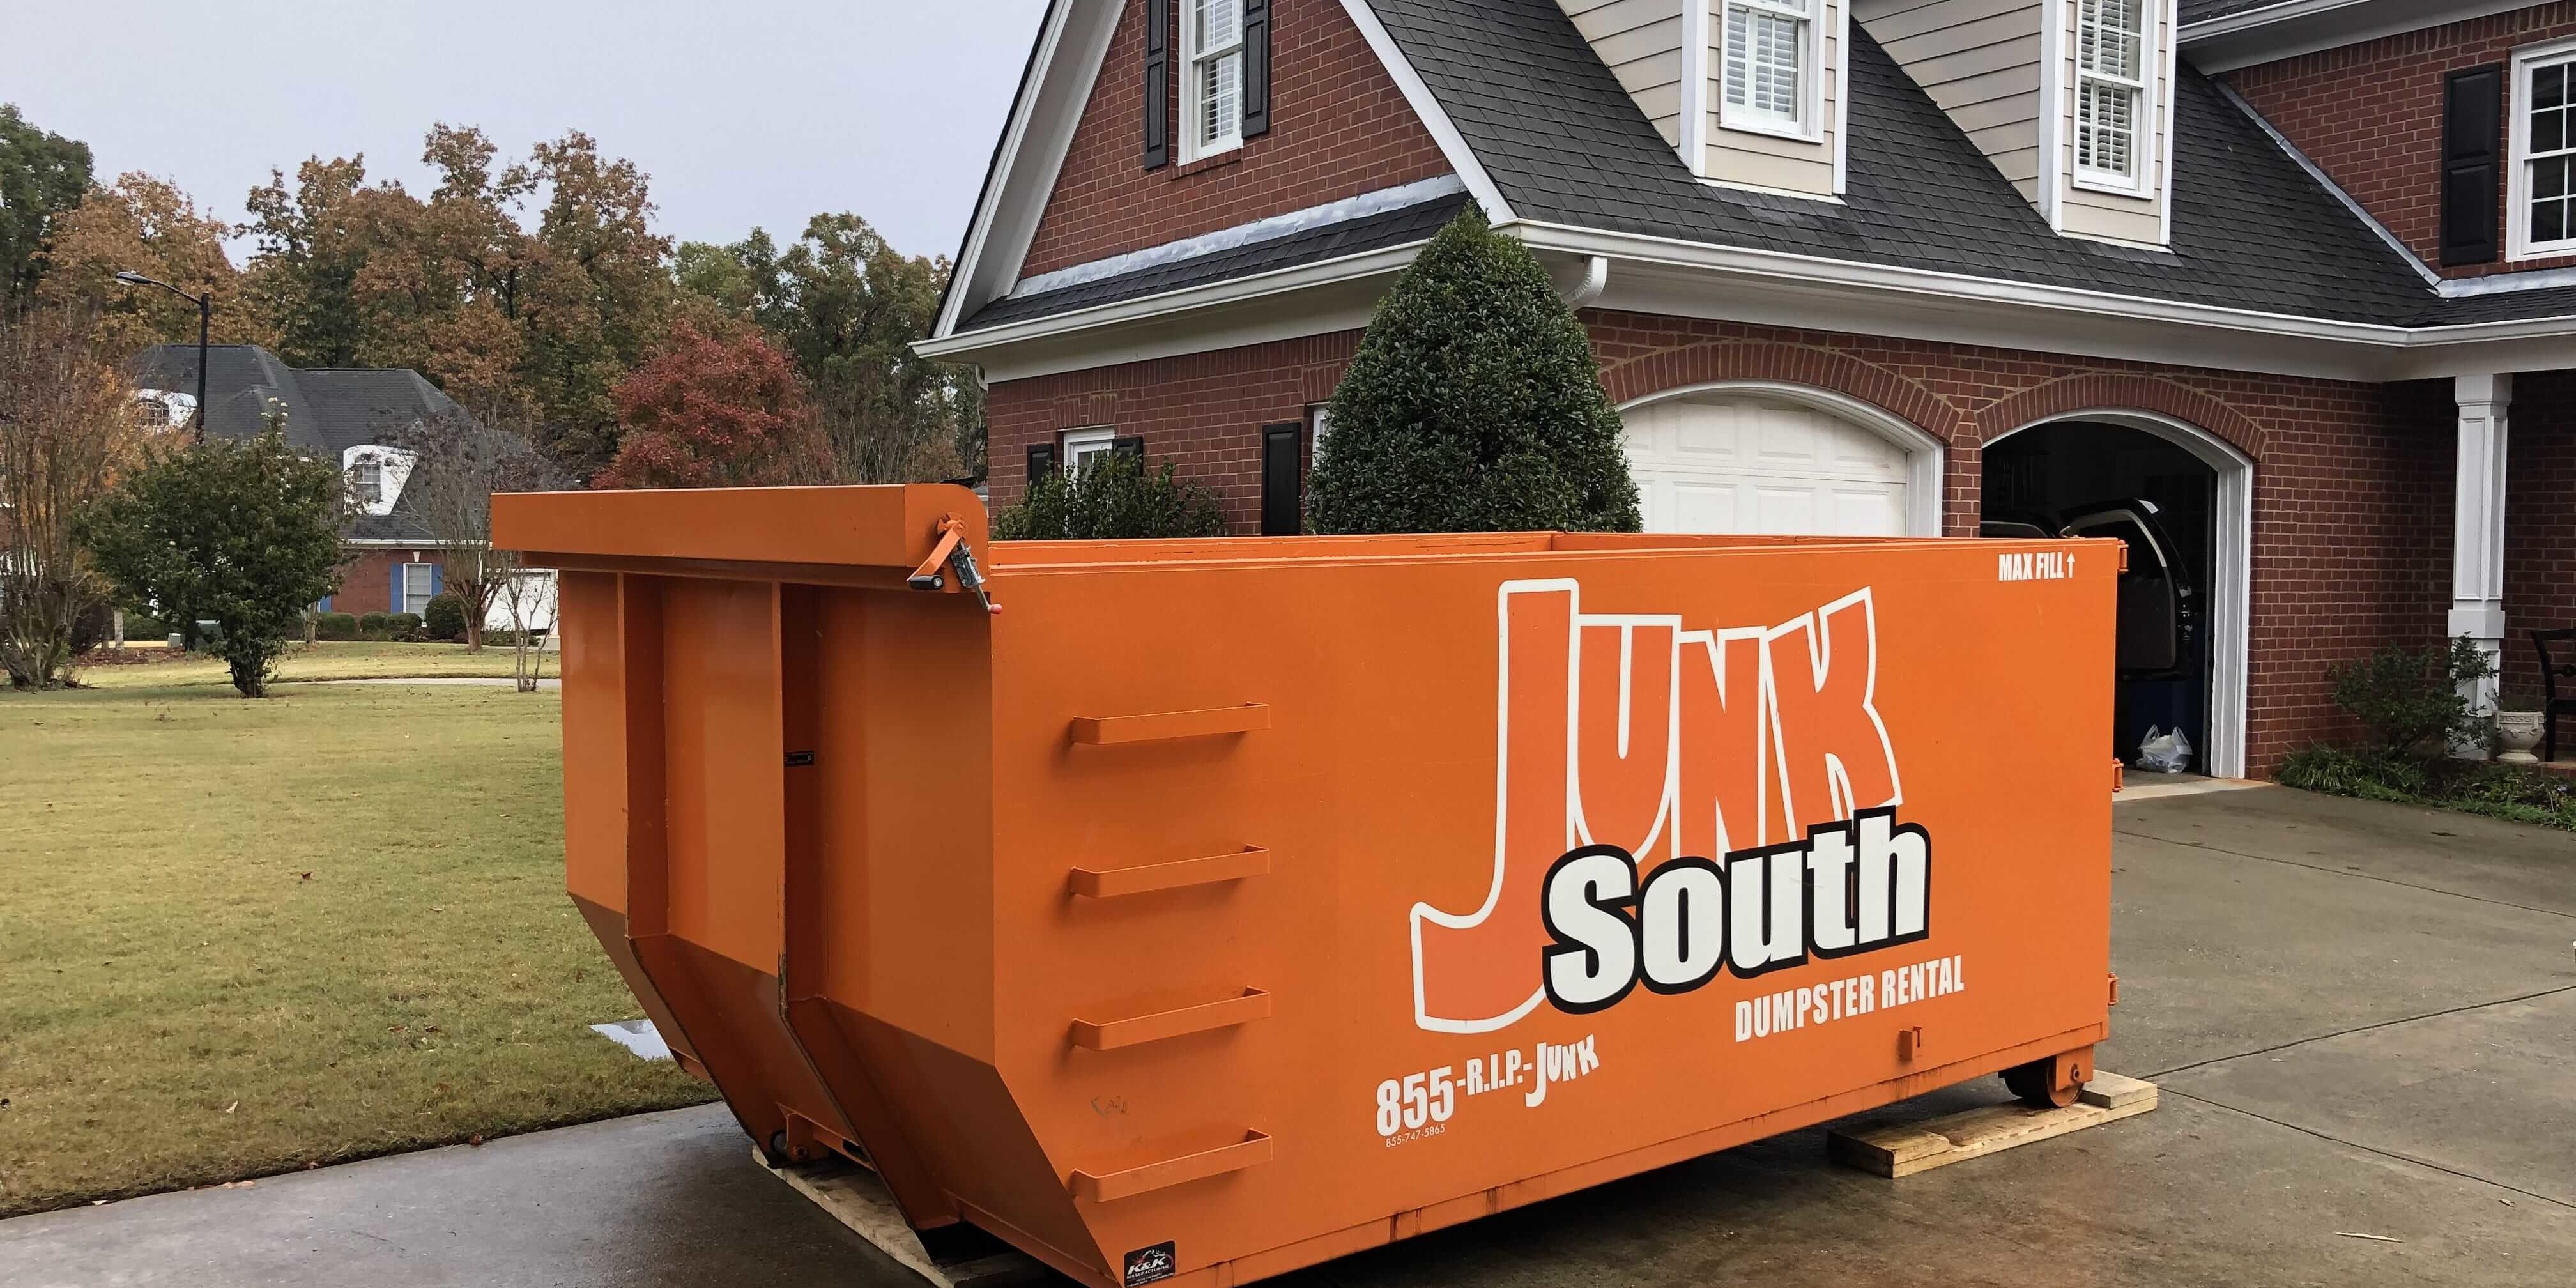 Junk South R.I.P. Roll Off Dumpster in customer's driveway - Athens, GA